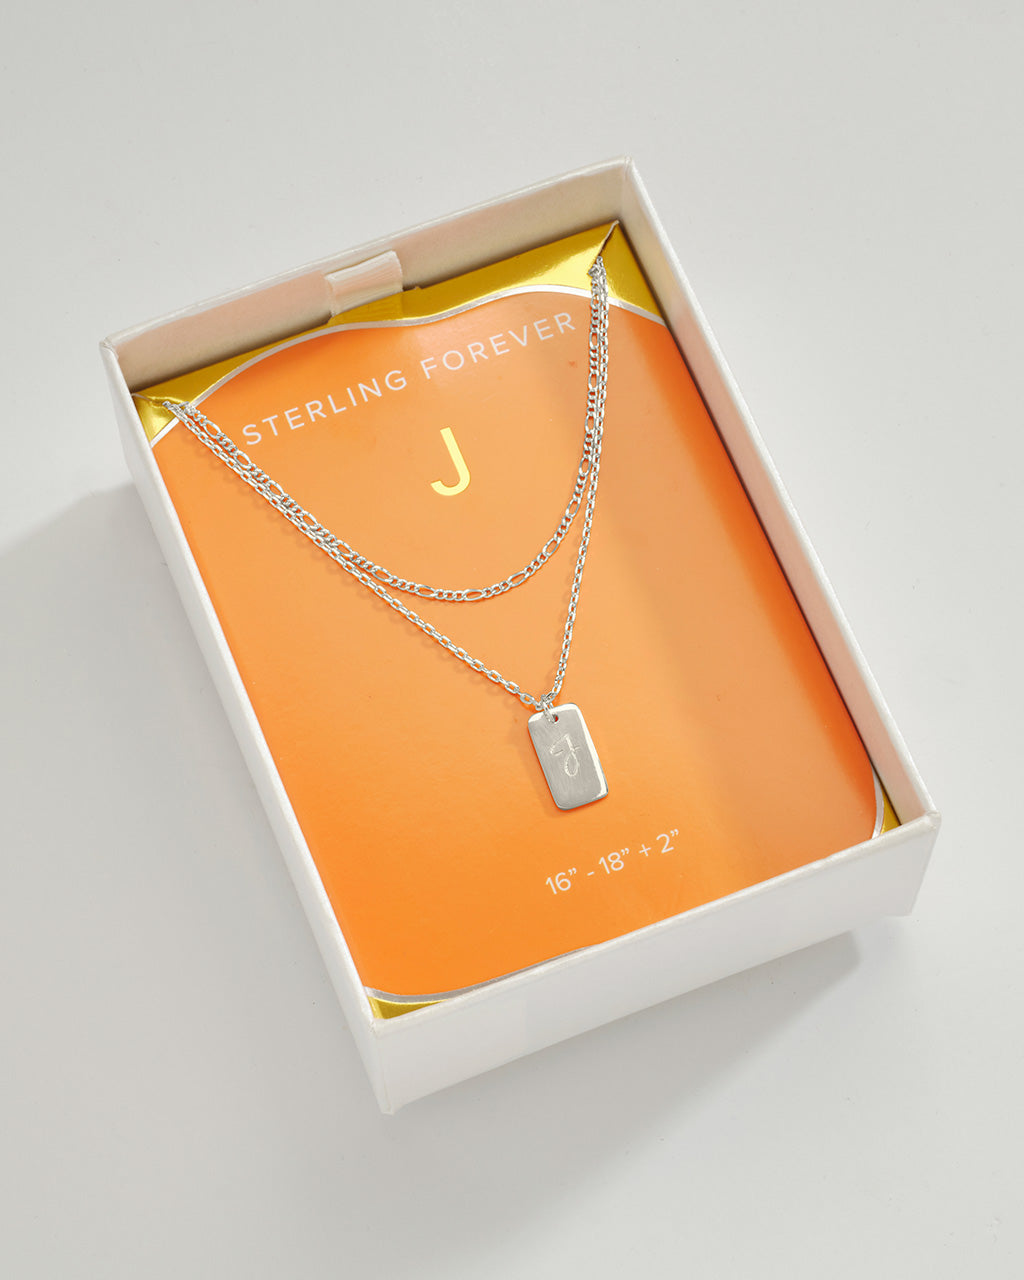 Layered Tag Initial Necklace Necklace Sterling Forever Silver J 